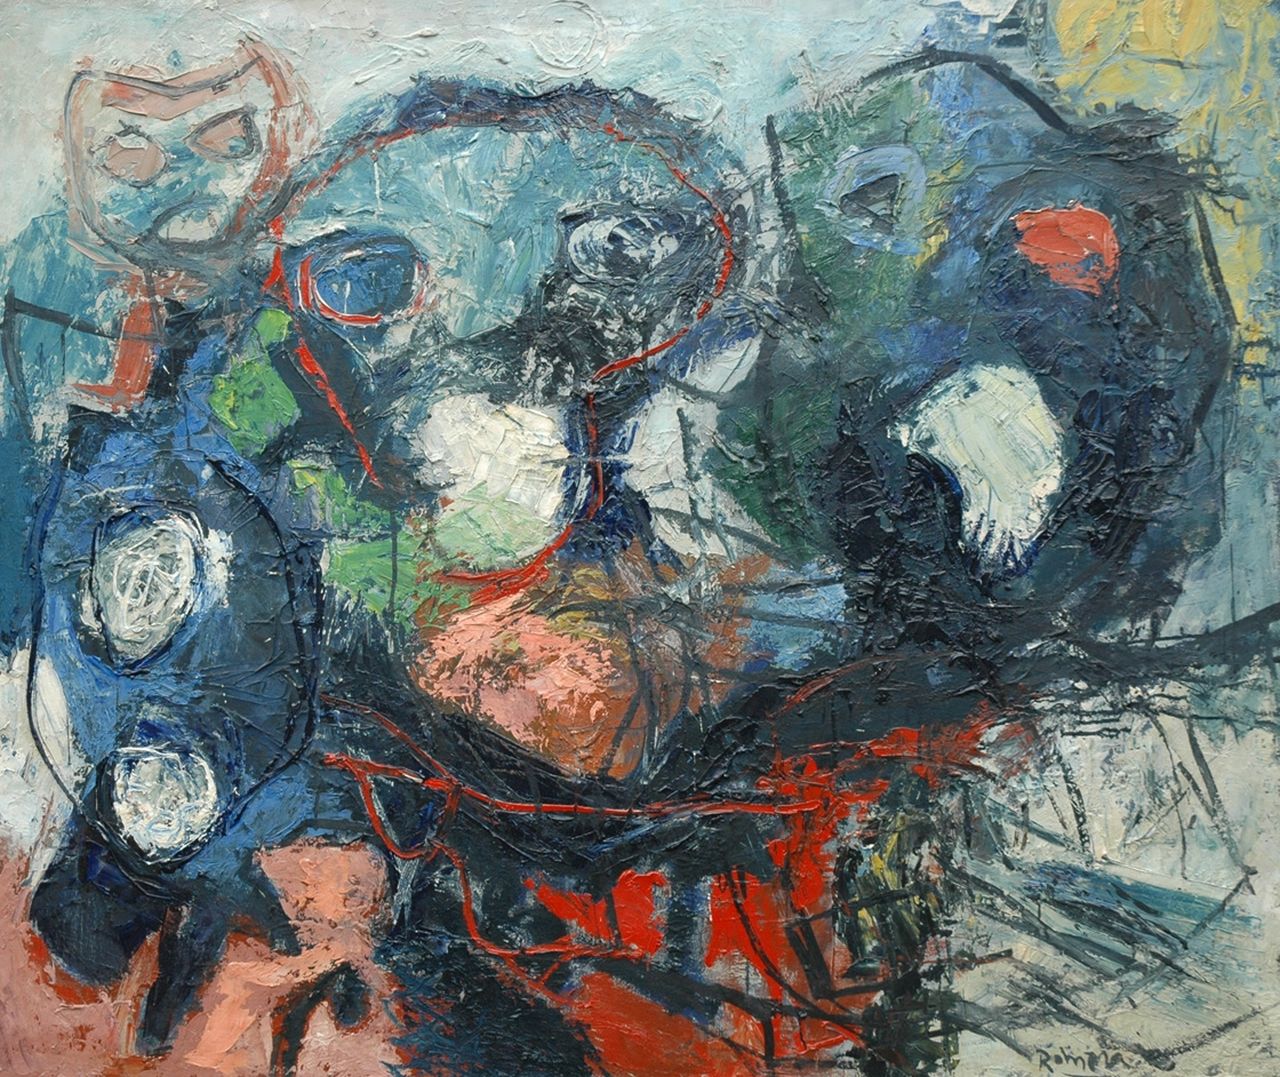 Romera J.  | Julio Romera, Untitled, oil on canvas 110.5 x 130.0 cm, signed l.r. and dated '62/Amsterdam verso